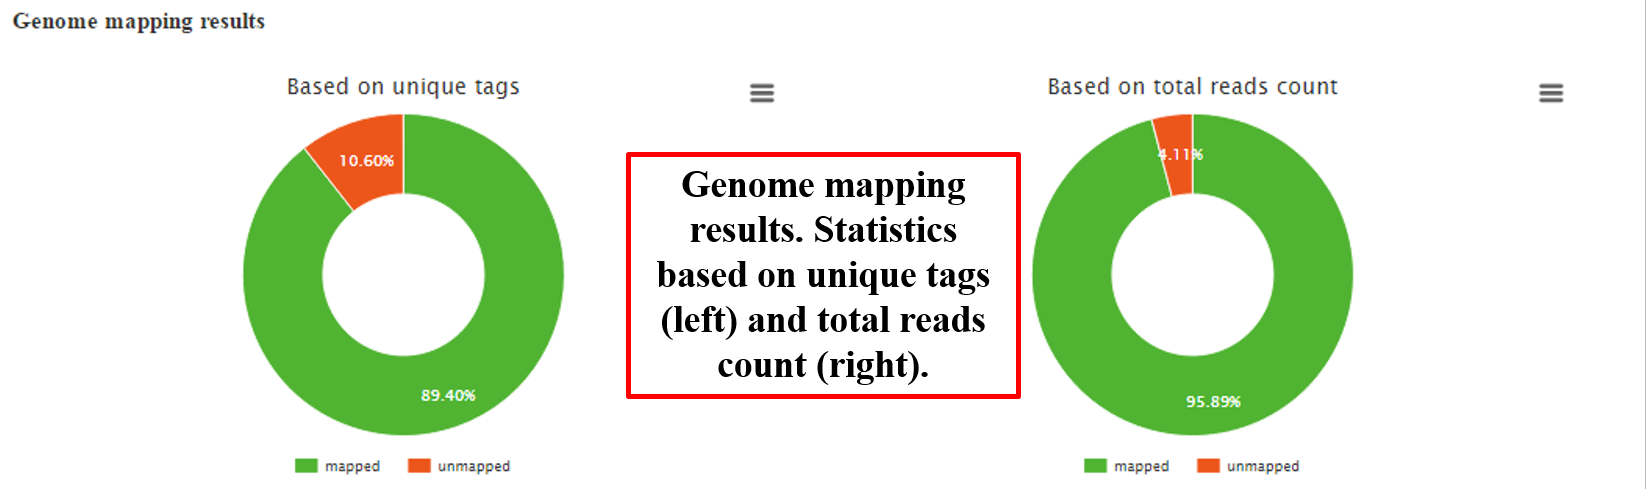 Genome Mapping Results 